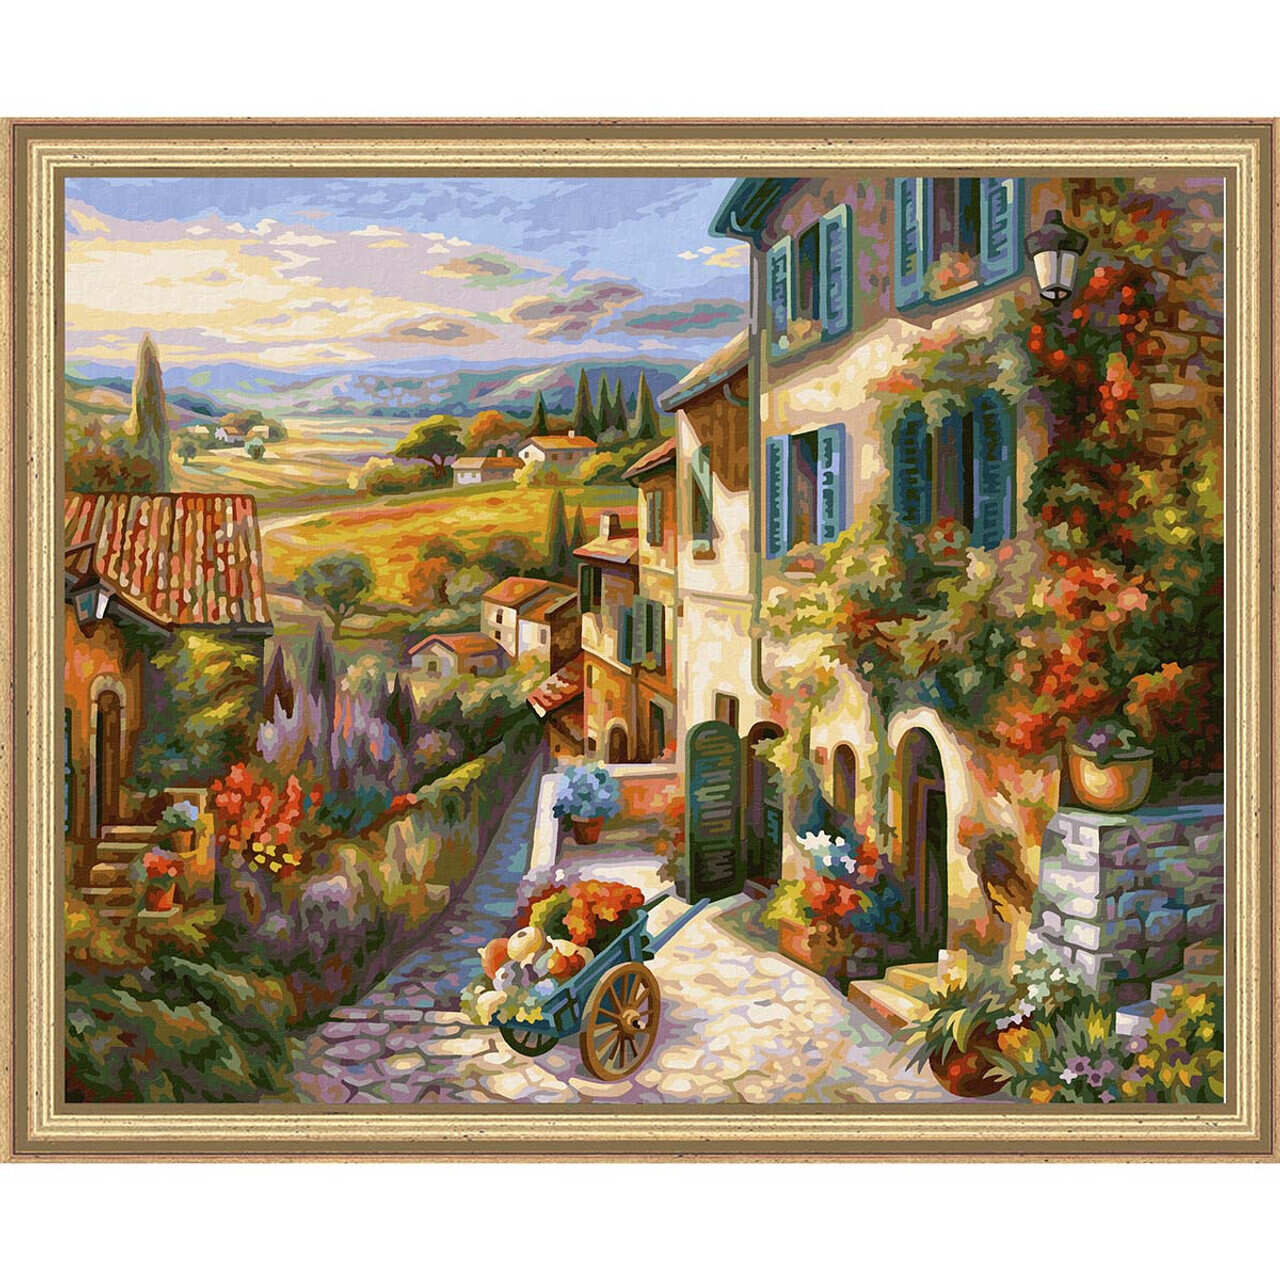 Schipper MNZ-Tuscan Idyll Kit & Frame Paint by Number Kit